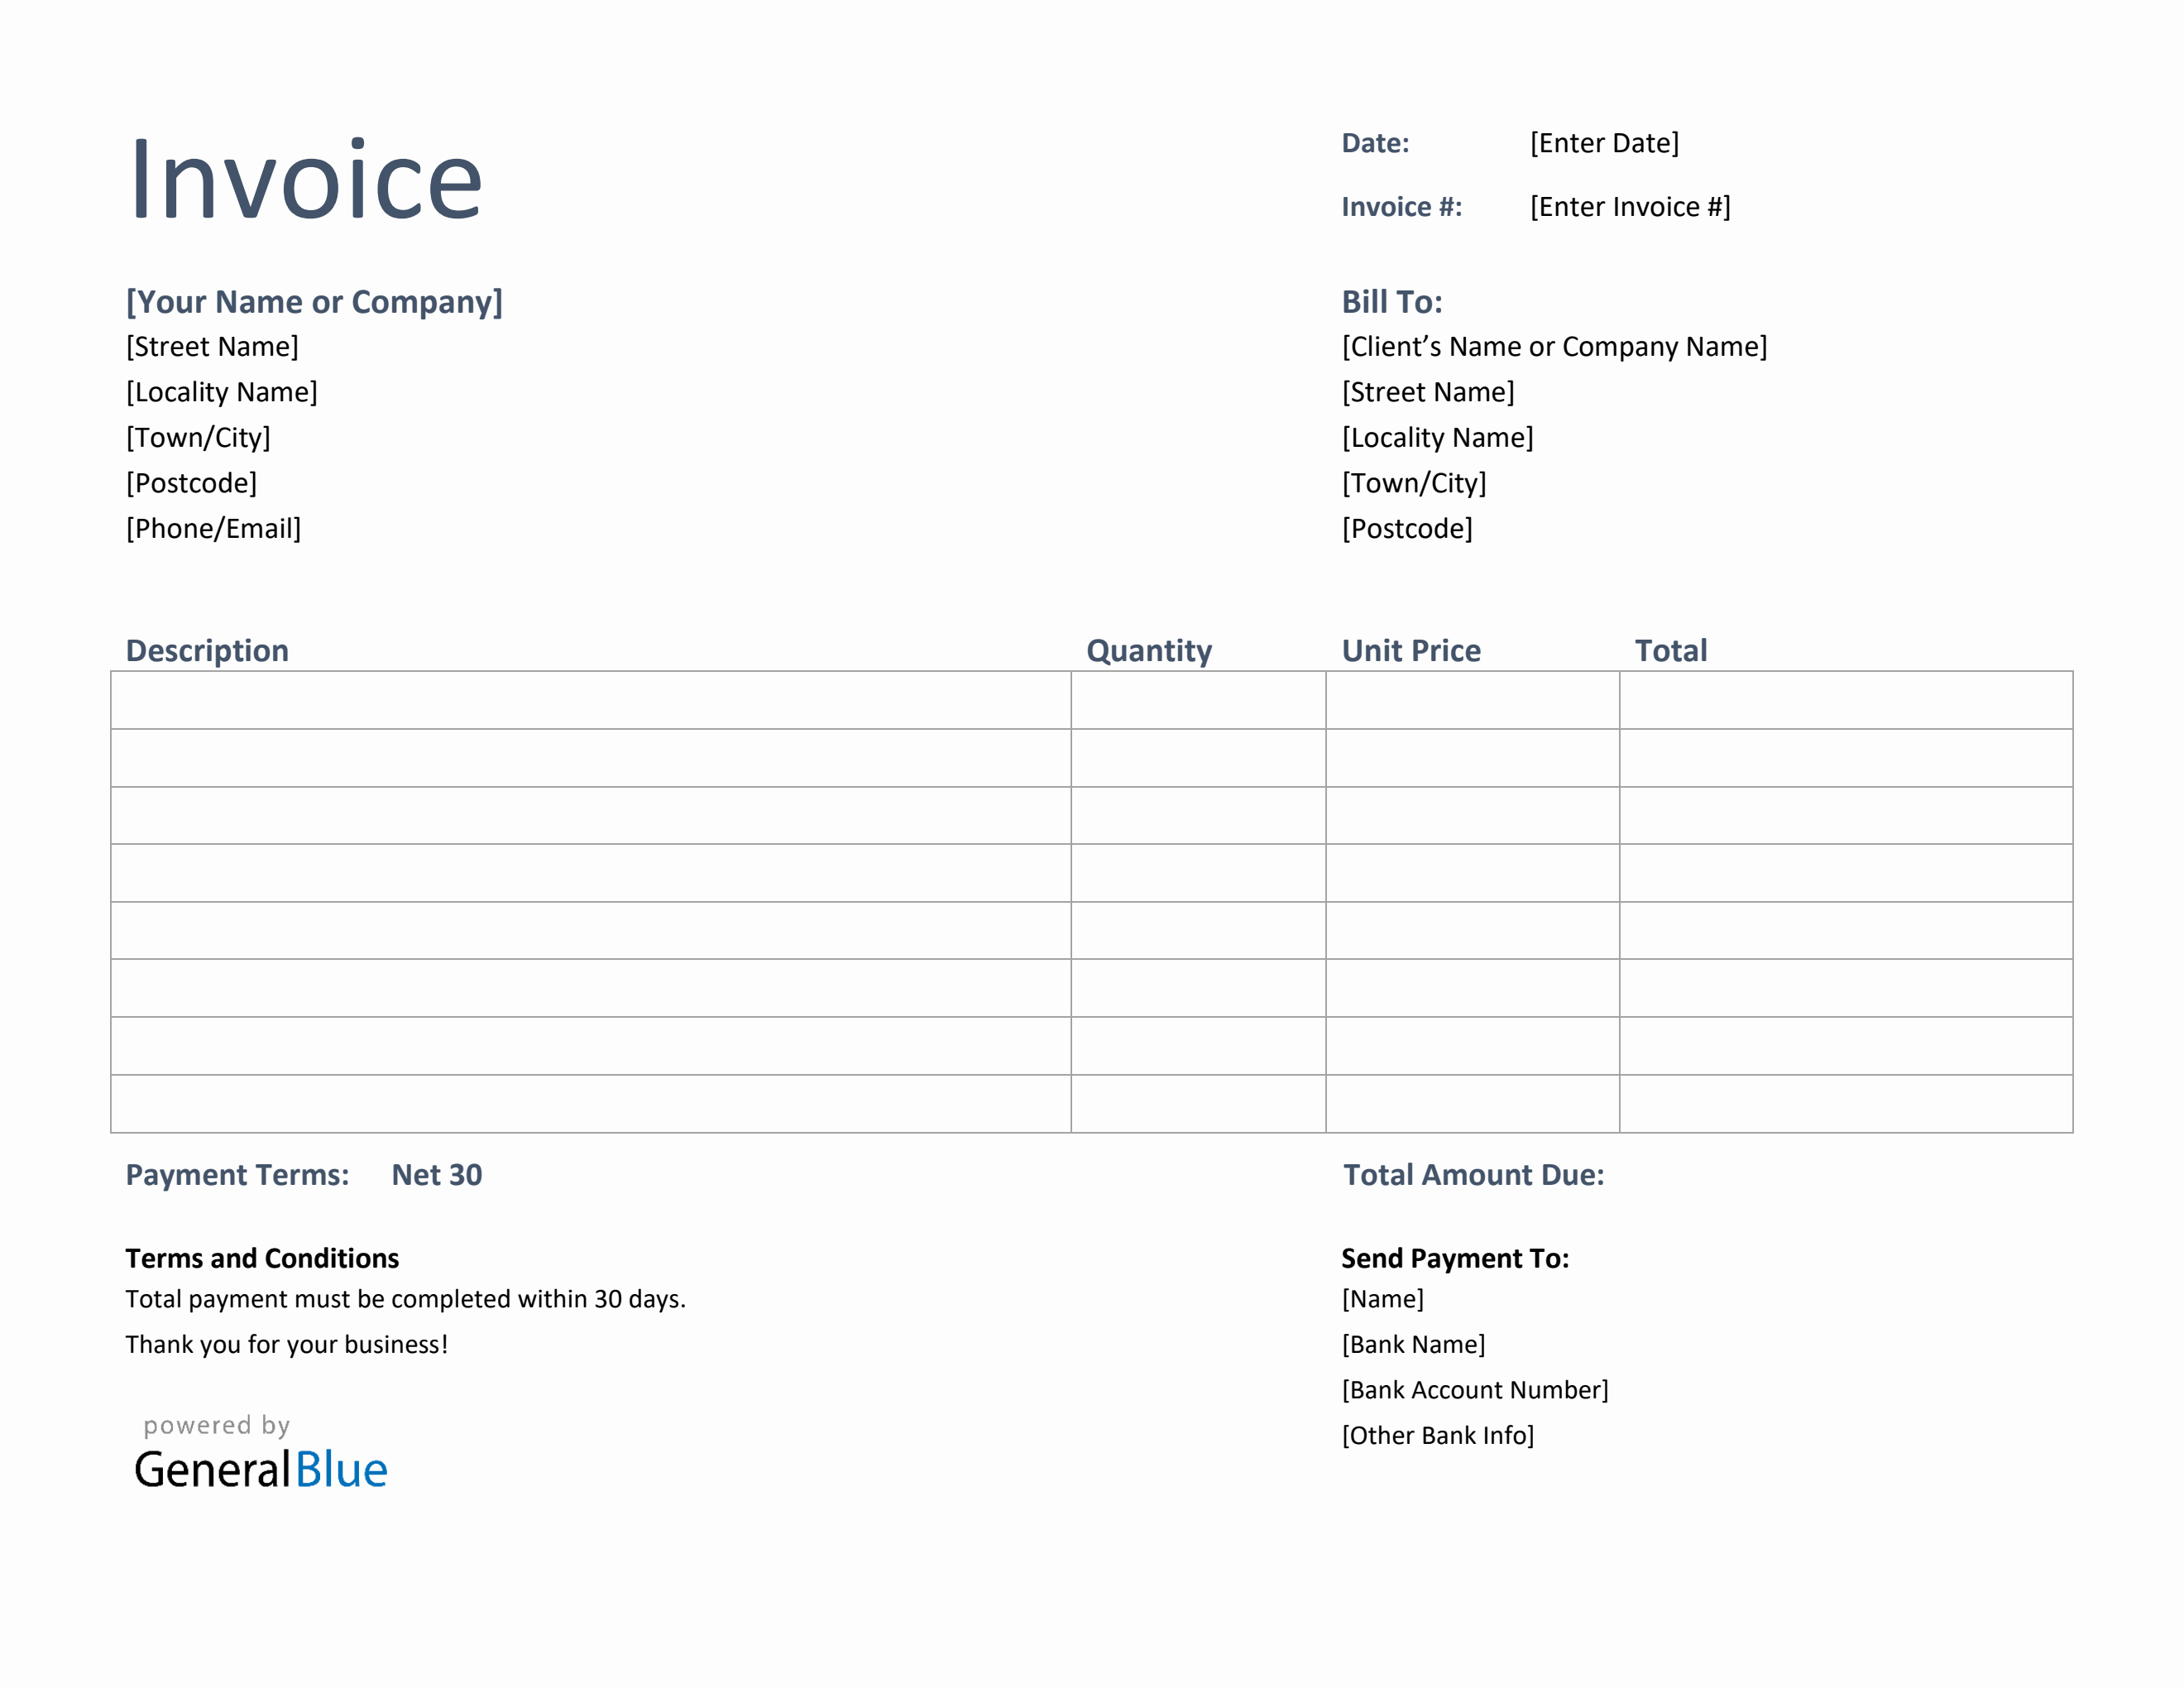 Invoice Template for U.K. in Word (Basic) Throughout Sample Invoice Template Uk